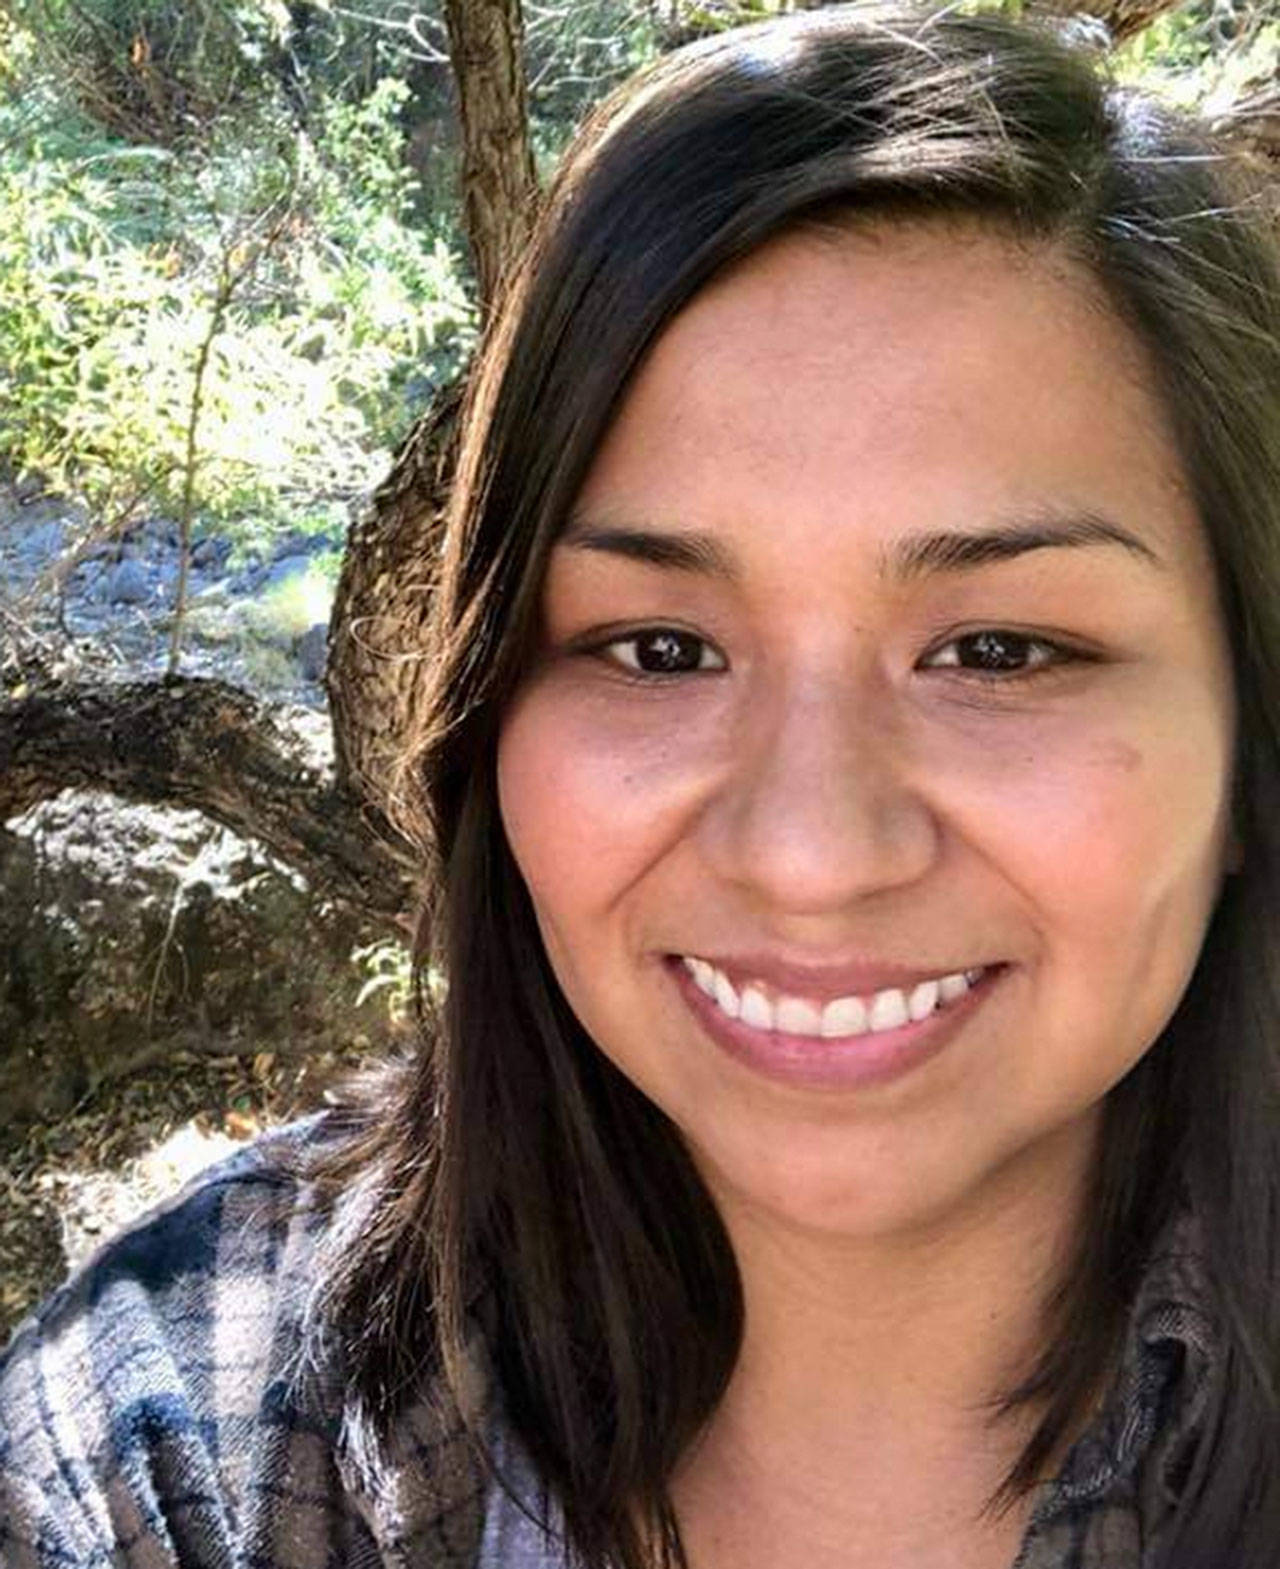 Local law enforcement officials are seeking the whereabouts of Catherine Louise Raya, who reportedly fled the scene of an Oct. 20 crash near Sappho. Submitted photo